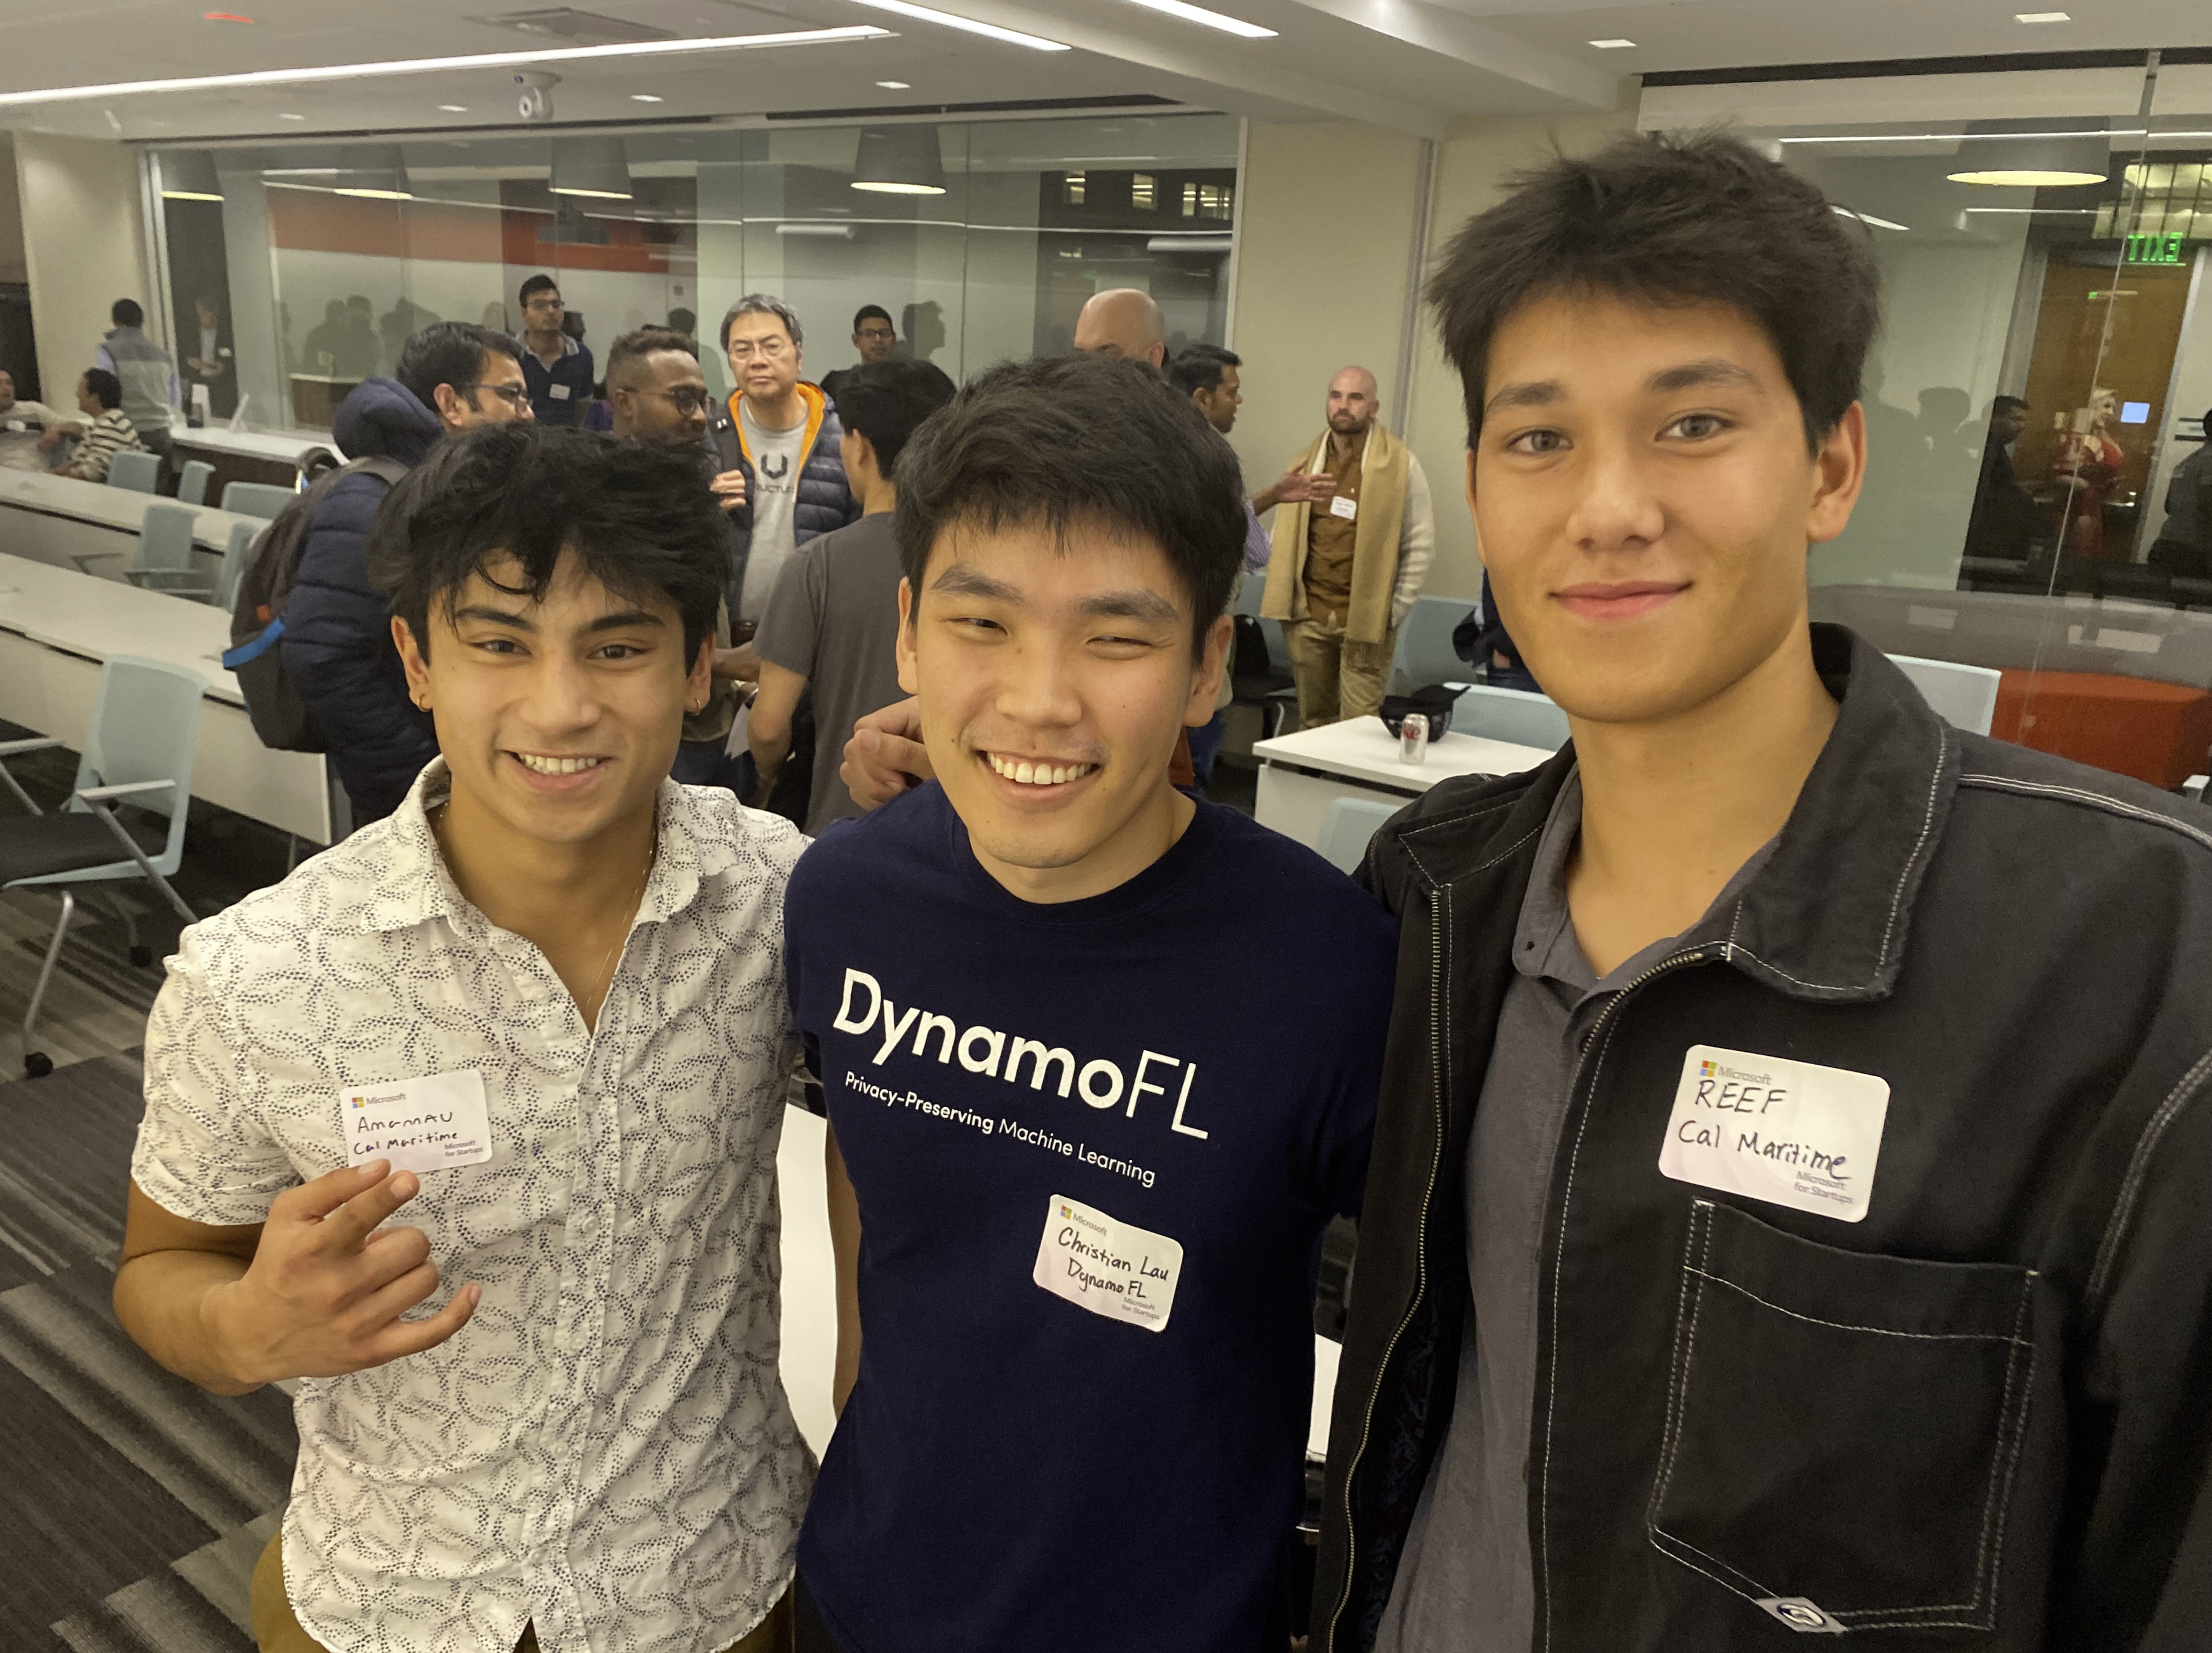 Shown with cadets Reef and Amann is Christian Lau, co-founder of DynamoFL, who recently closed a Series A fundraiser of $15 million.